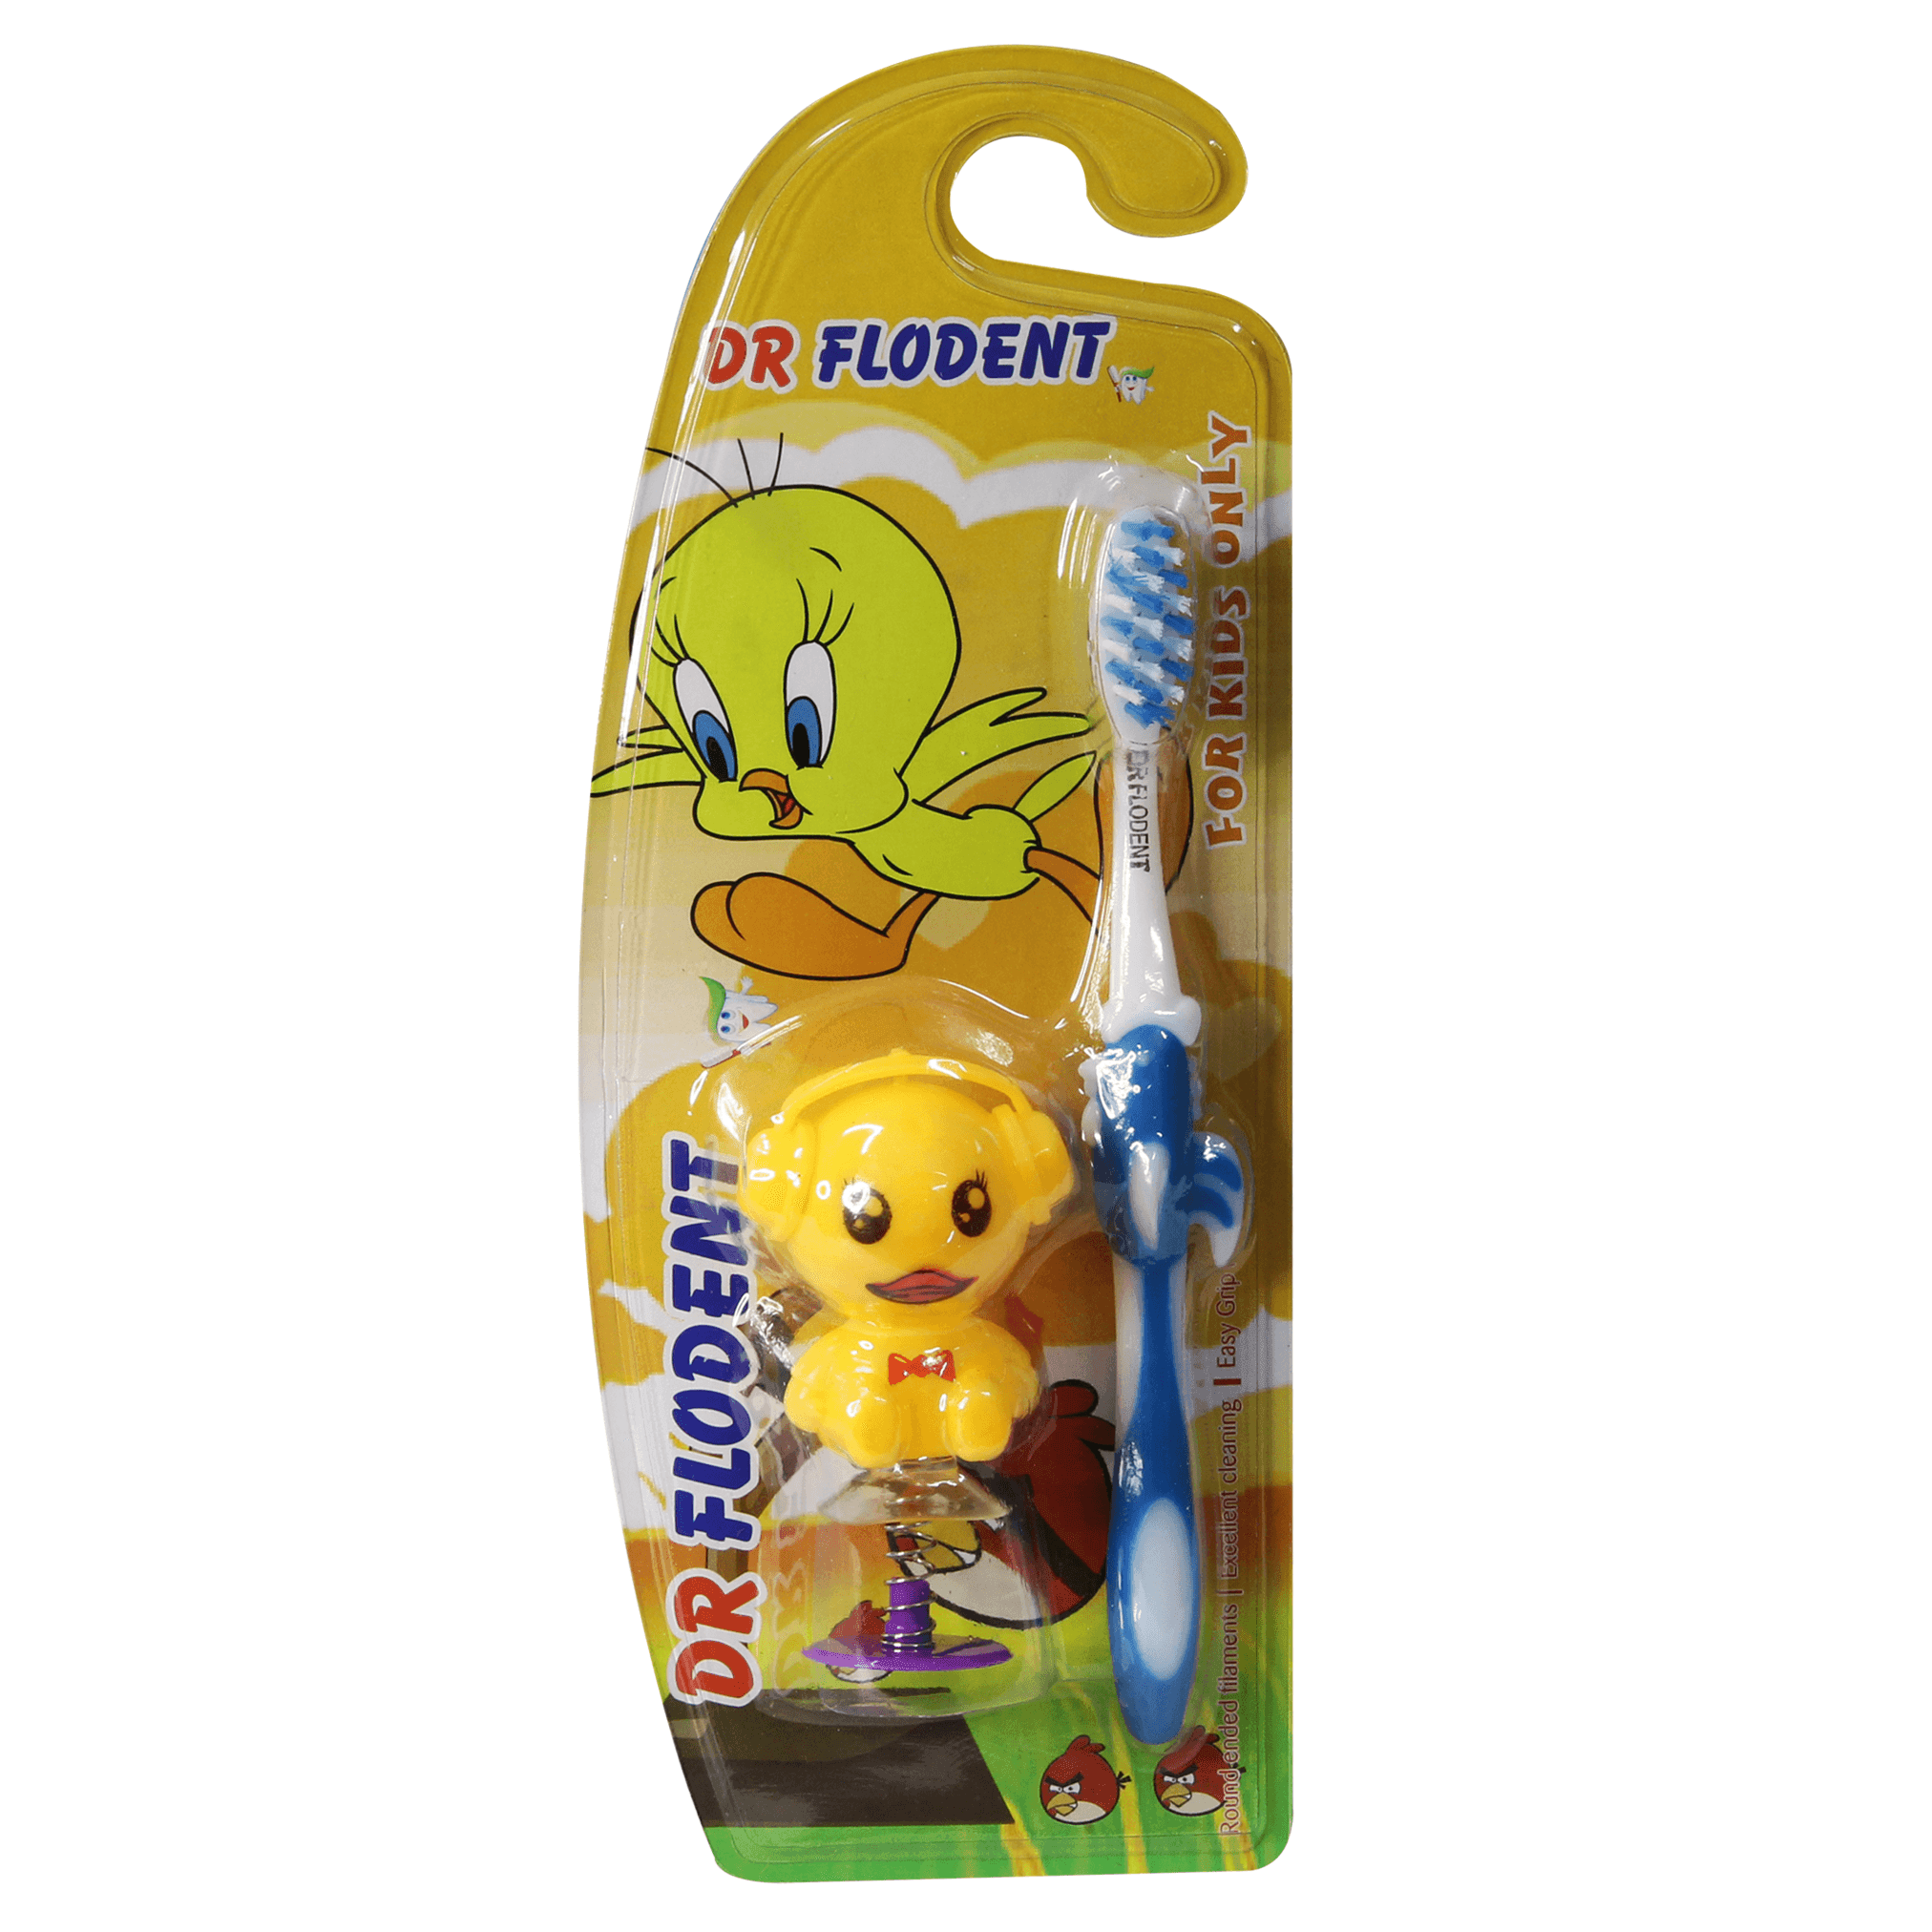 Dr Flodent Kids Toothbrush Extra Soft With Tweetie Toy - BumbleToys - 2-4 Years, 5-7 Years, Baby Saftey & Health, Boys, Girls, Toothbrush